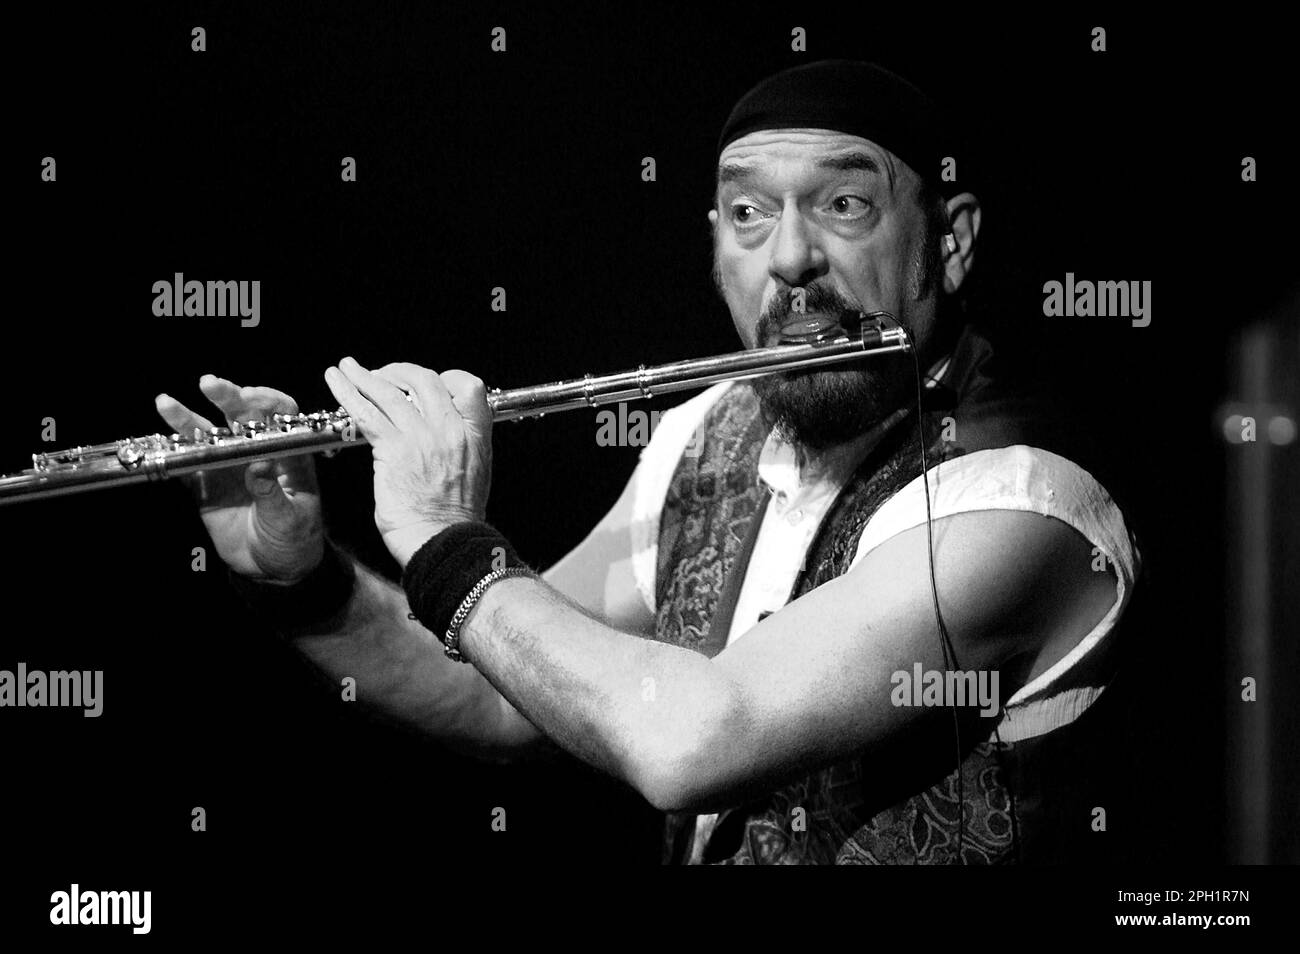 Ian Anderson, of Jethro Tull band, coming to St. Augustine